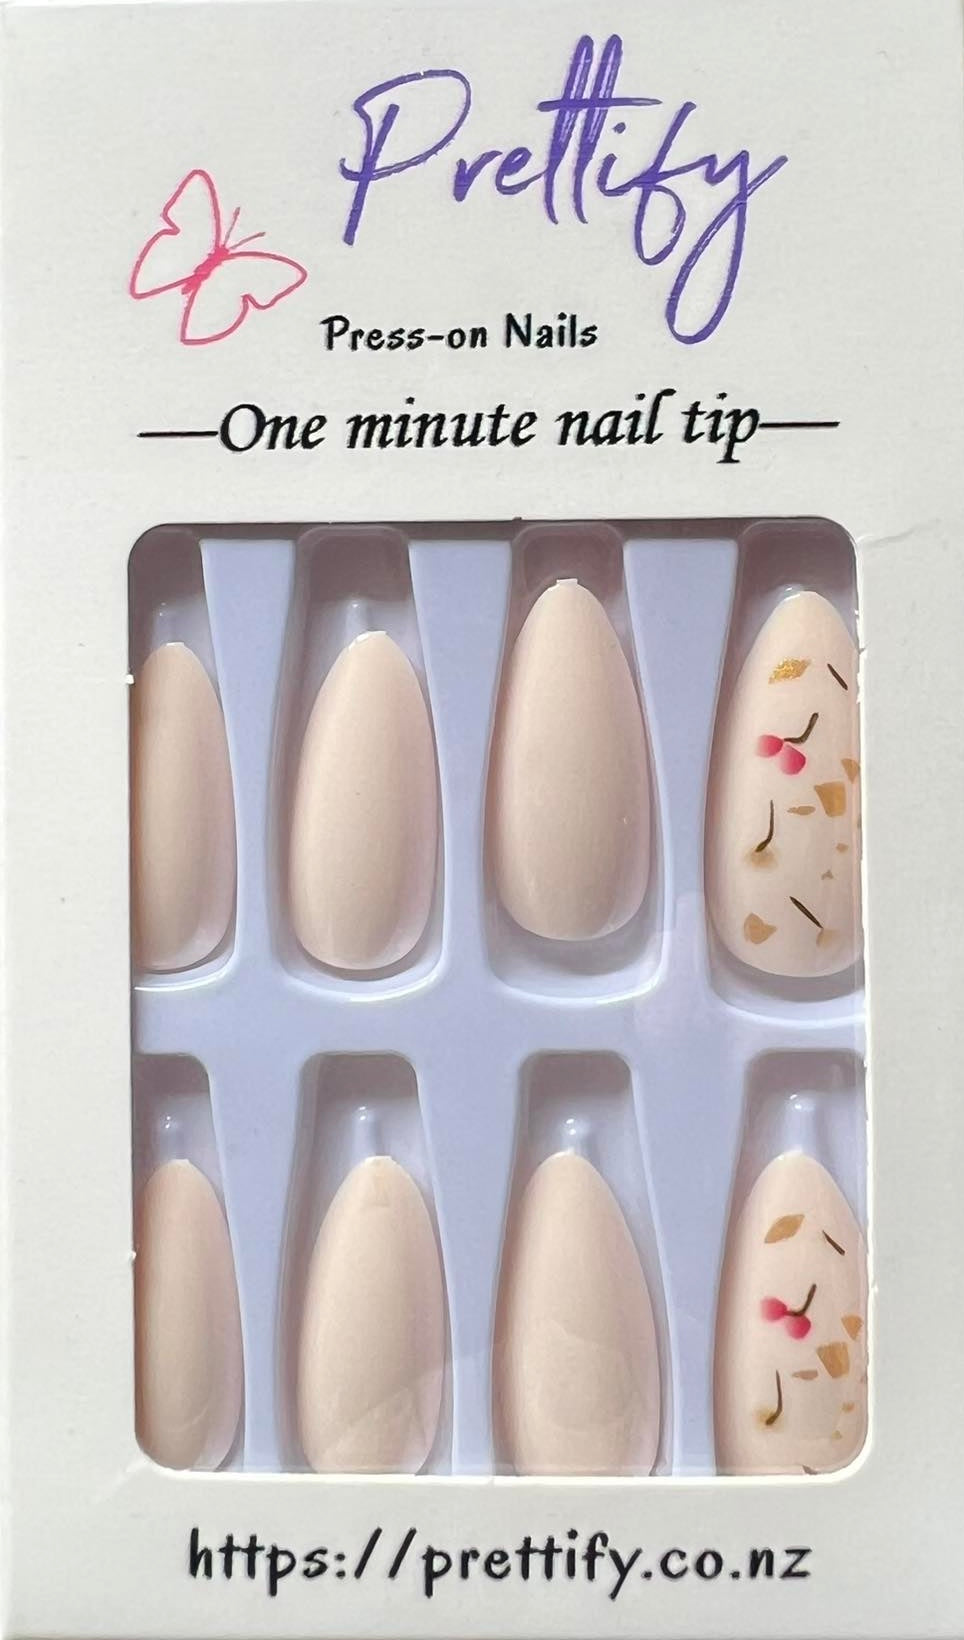 Almond Press on Nails. Cream with Flowers. Durable Acrylic Press on Nails. Easy and quick to apply. Great for those special occasions, parties or add an edge to any outfit. Gorgeous, flattering and you can re-use them again and again.